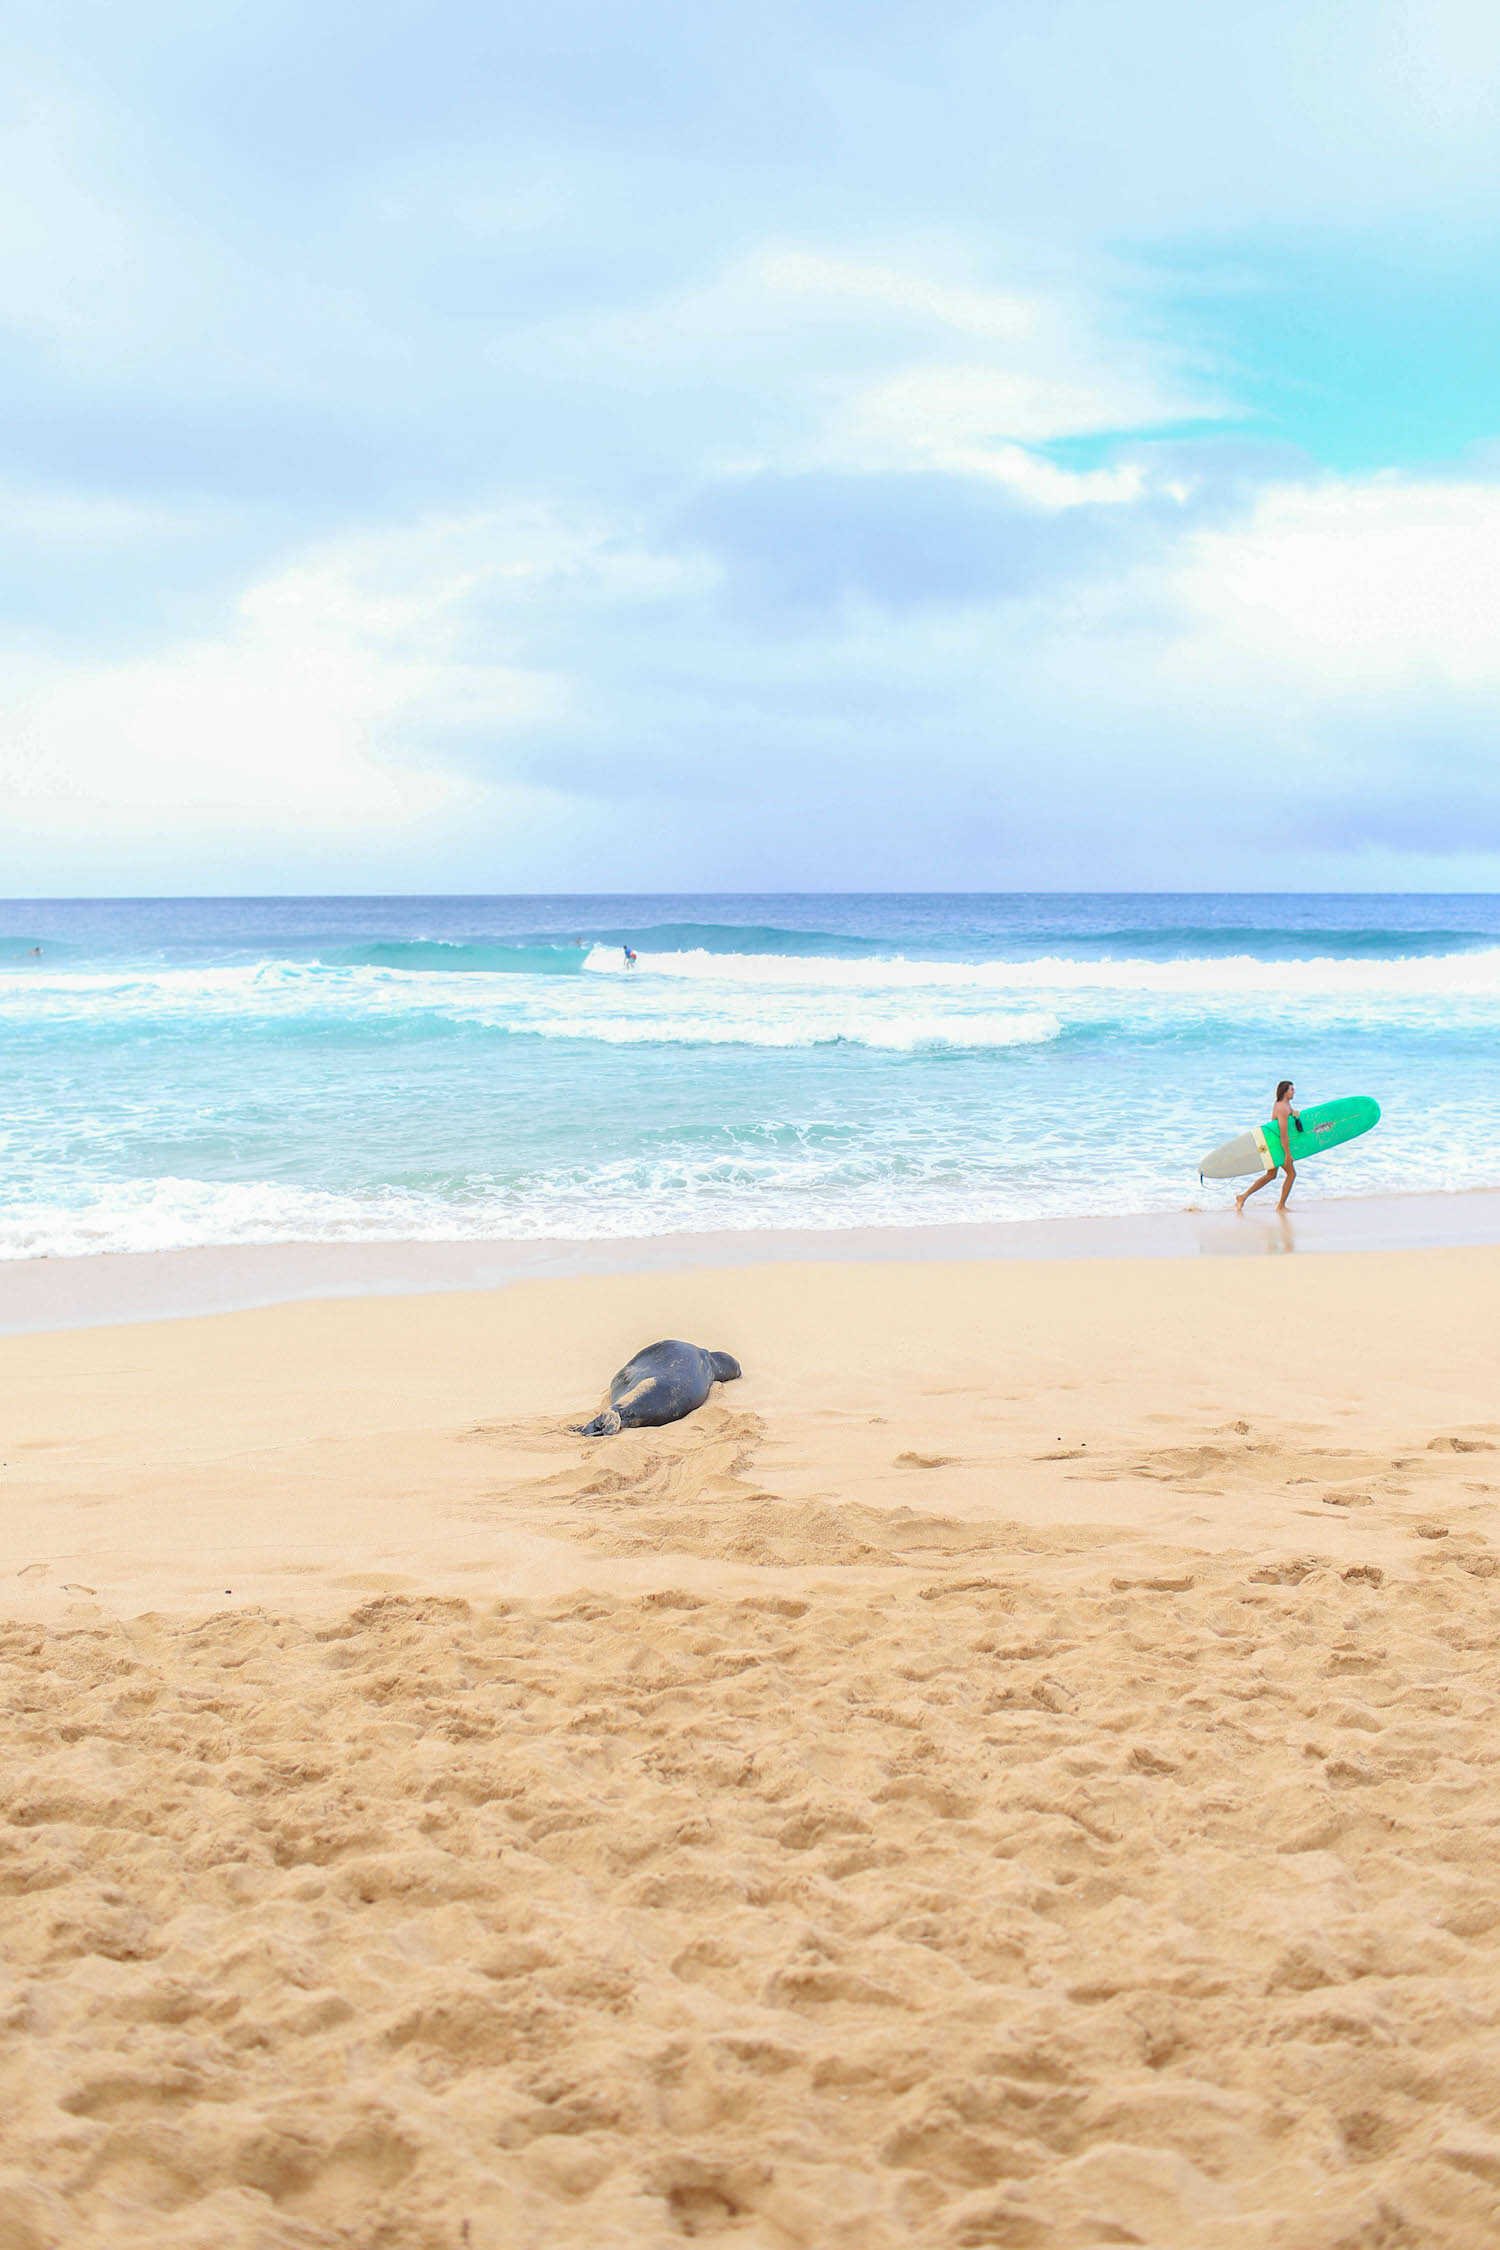 Top 10 Epic 30th Birthday Travel Destinations - Surfer and seal on Sunset Beach on the North Shore of Oahu.